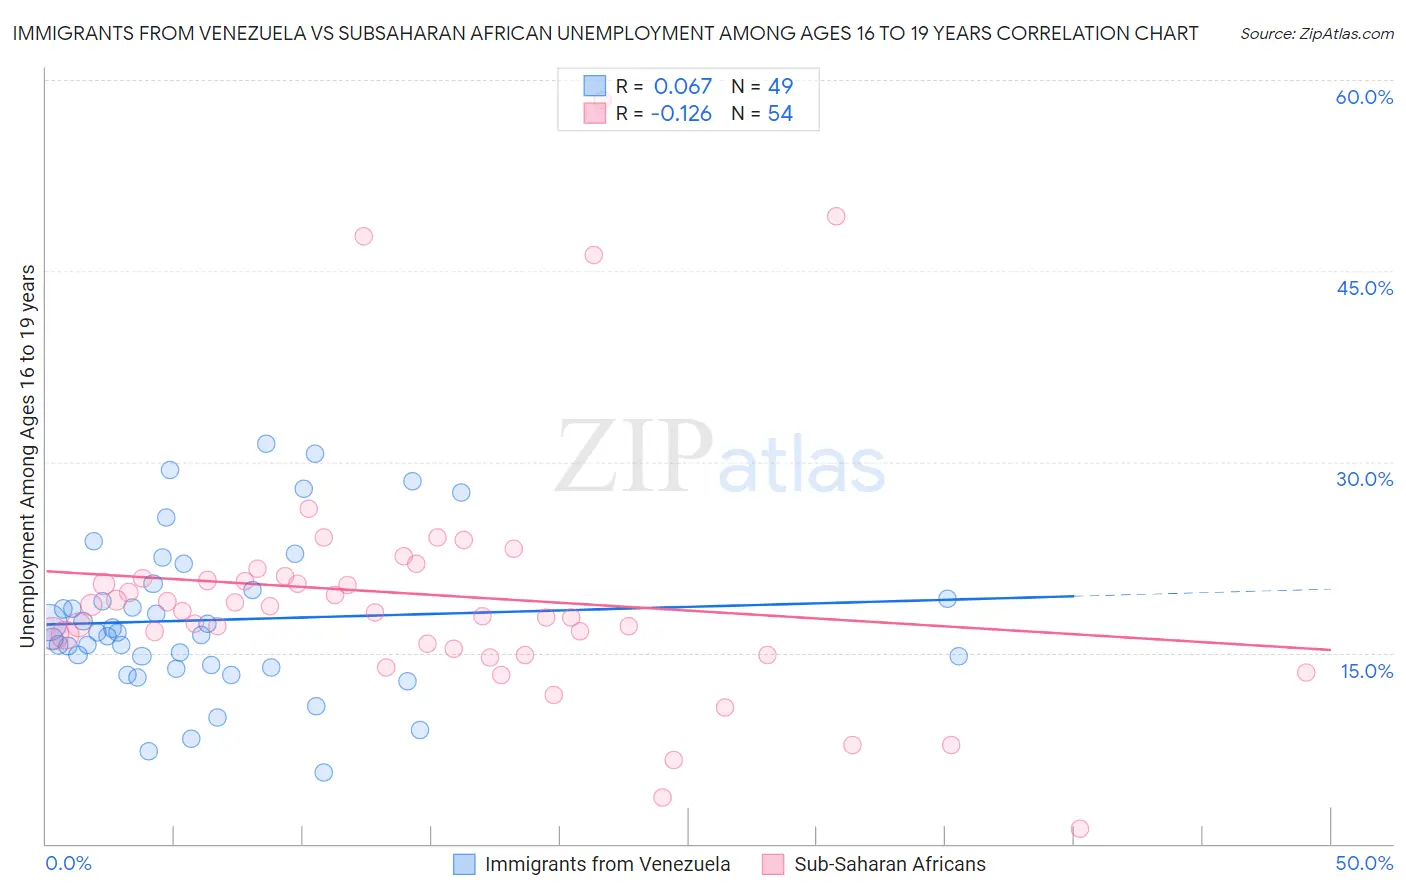 Immigrants from Venezuela vs Subsaharan African Unemployment Among Ages 16 to 19 years